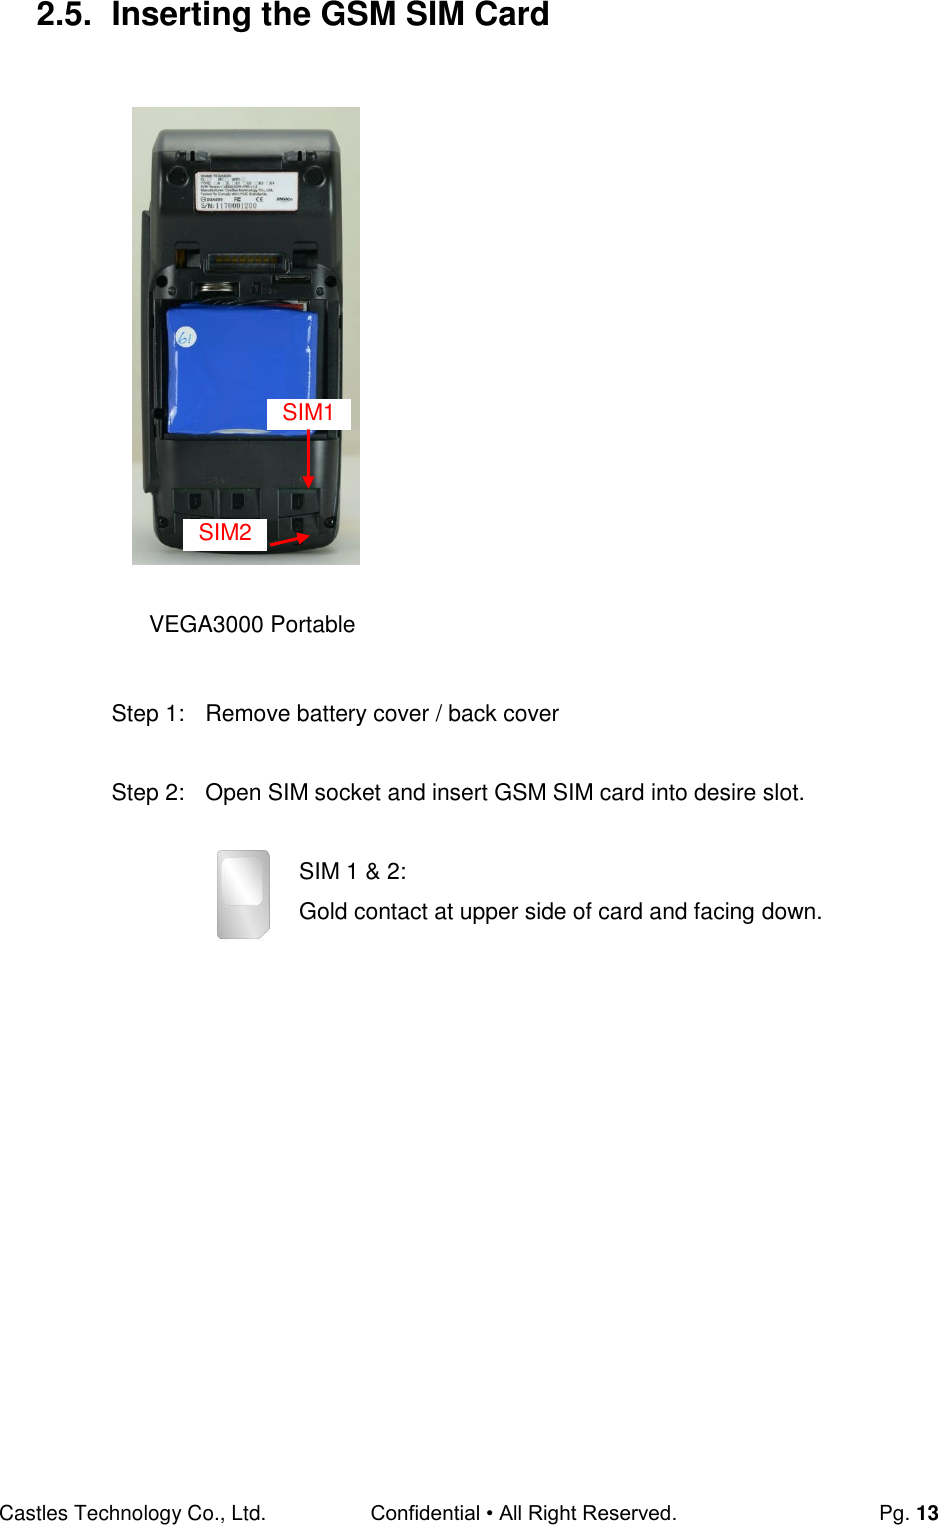 Castles Technology Co., Ltd. Confidential • All Right Reserved.  Pg. 13 2.5.  Inserting the GSM SIM Card                           Step 1:  Remove battery cover / back cover  Step 2:  Open SIM socket and insert GSM SIM card into desire slot.  SIM 1 &amp; 2:  Gold contact at upper side of card and facing down.         SIM2 SIM1 VEGA3000 Portable 